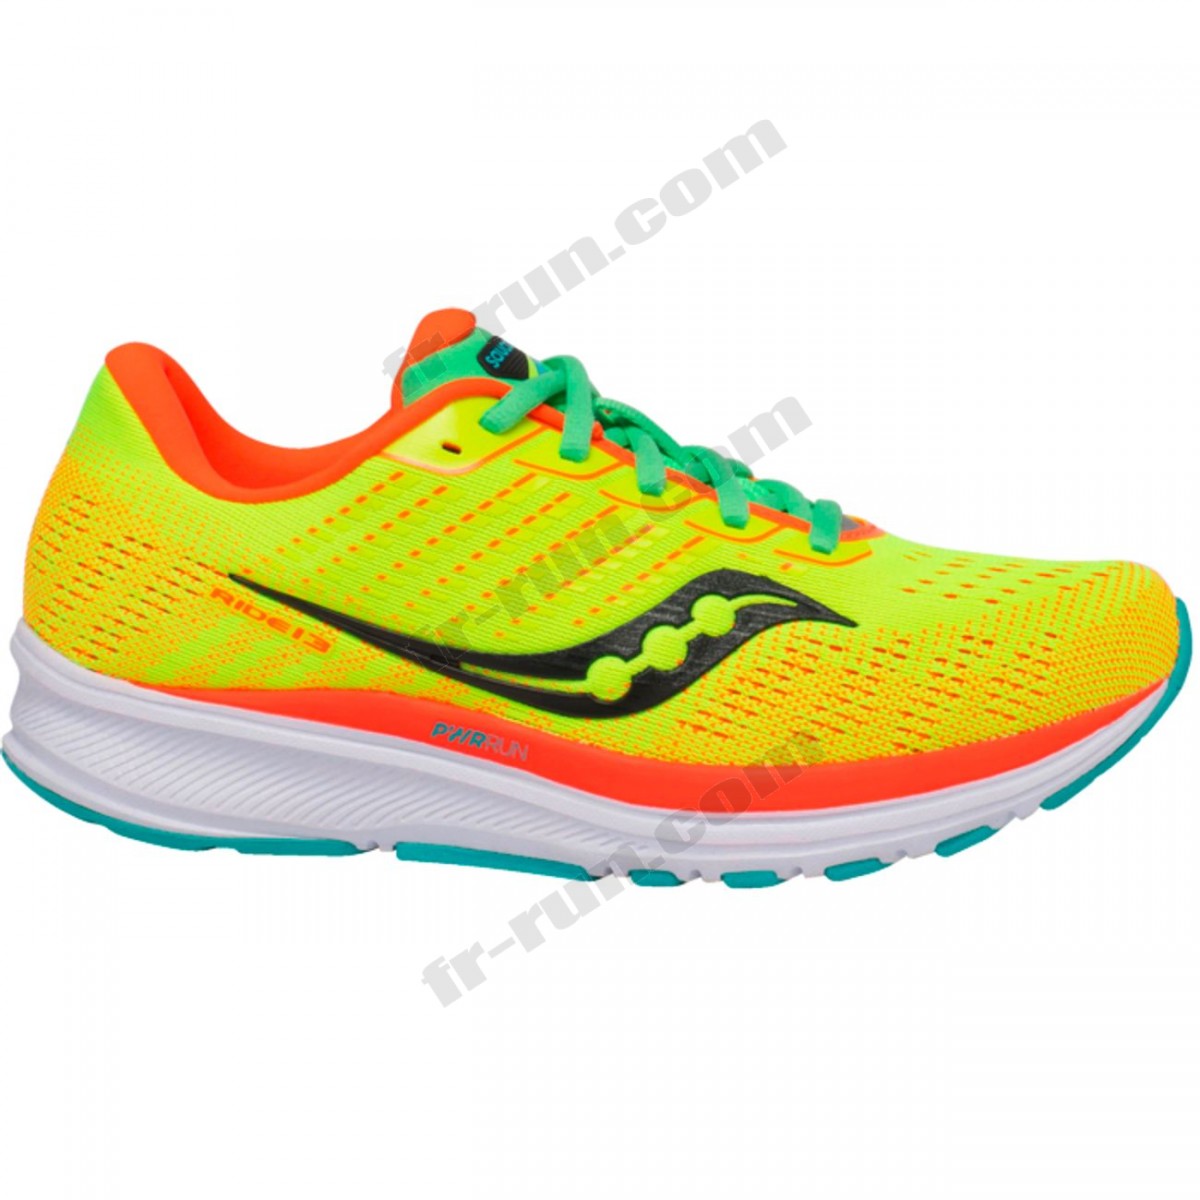 Saucony/CHAUSSURES BASSES running femme SAUCONY RIDE 13 W ◇◇◇ Pas Cher Du Tout - Saucony/CHAUSSURES BASSES running femme SAUCONY RIDE 13 W ◇◇◇ Pas Cher Du Tout